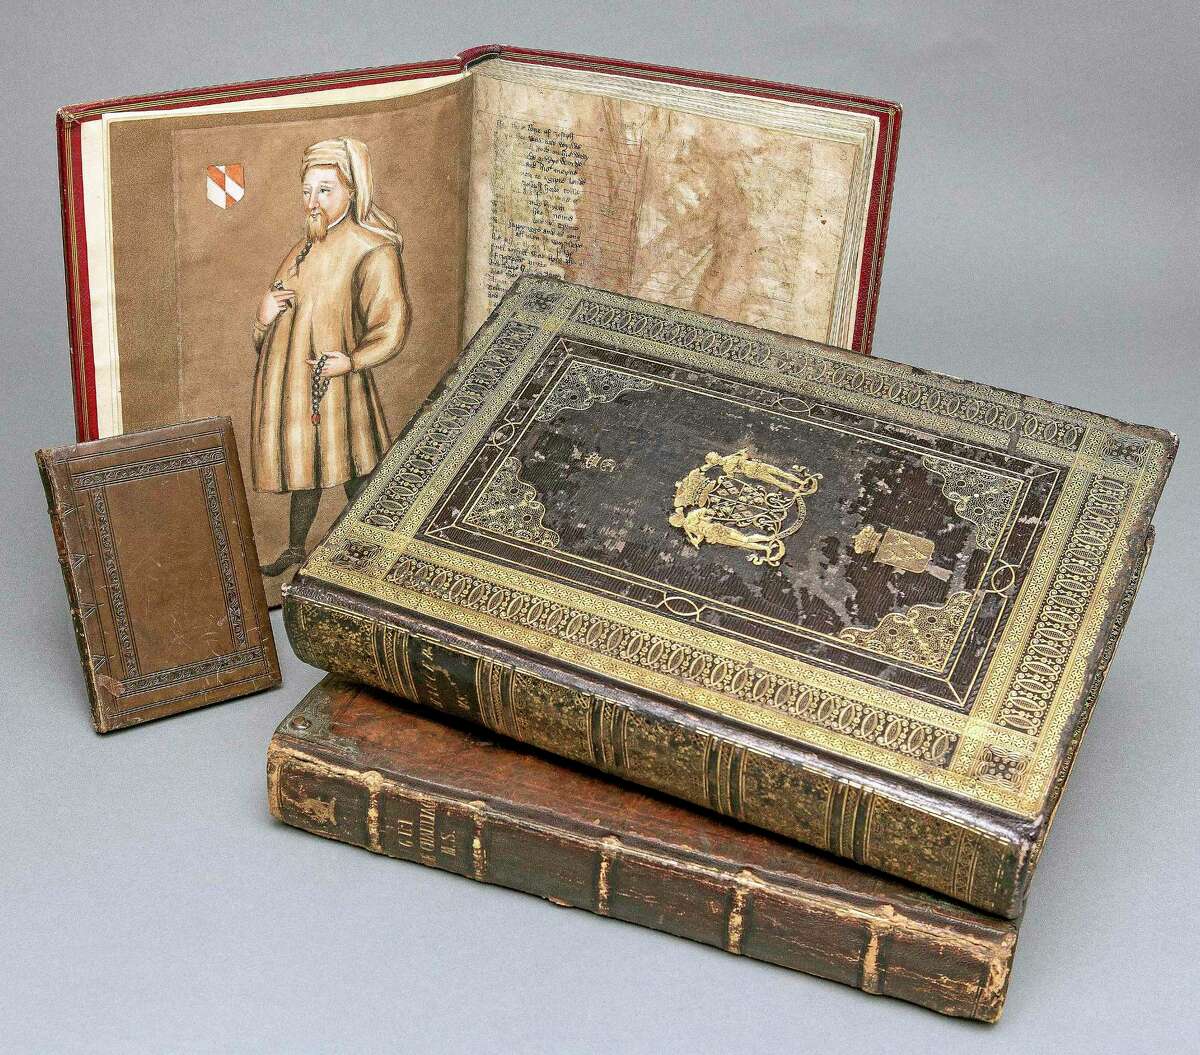 Associated Press This Oct. 16, 2013 photo released by Yale University shows three copies of Chaucer’s “The Canterbury Tales,” part of a privately owned collection of Middle English texts now on long-term loan at the Beinecke Rare Book & Manuscript Library at the school.